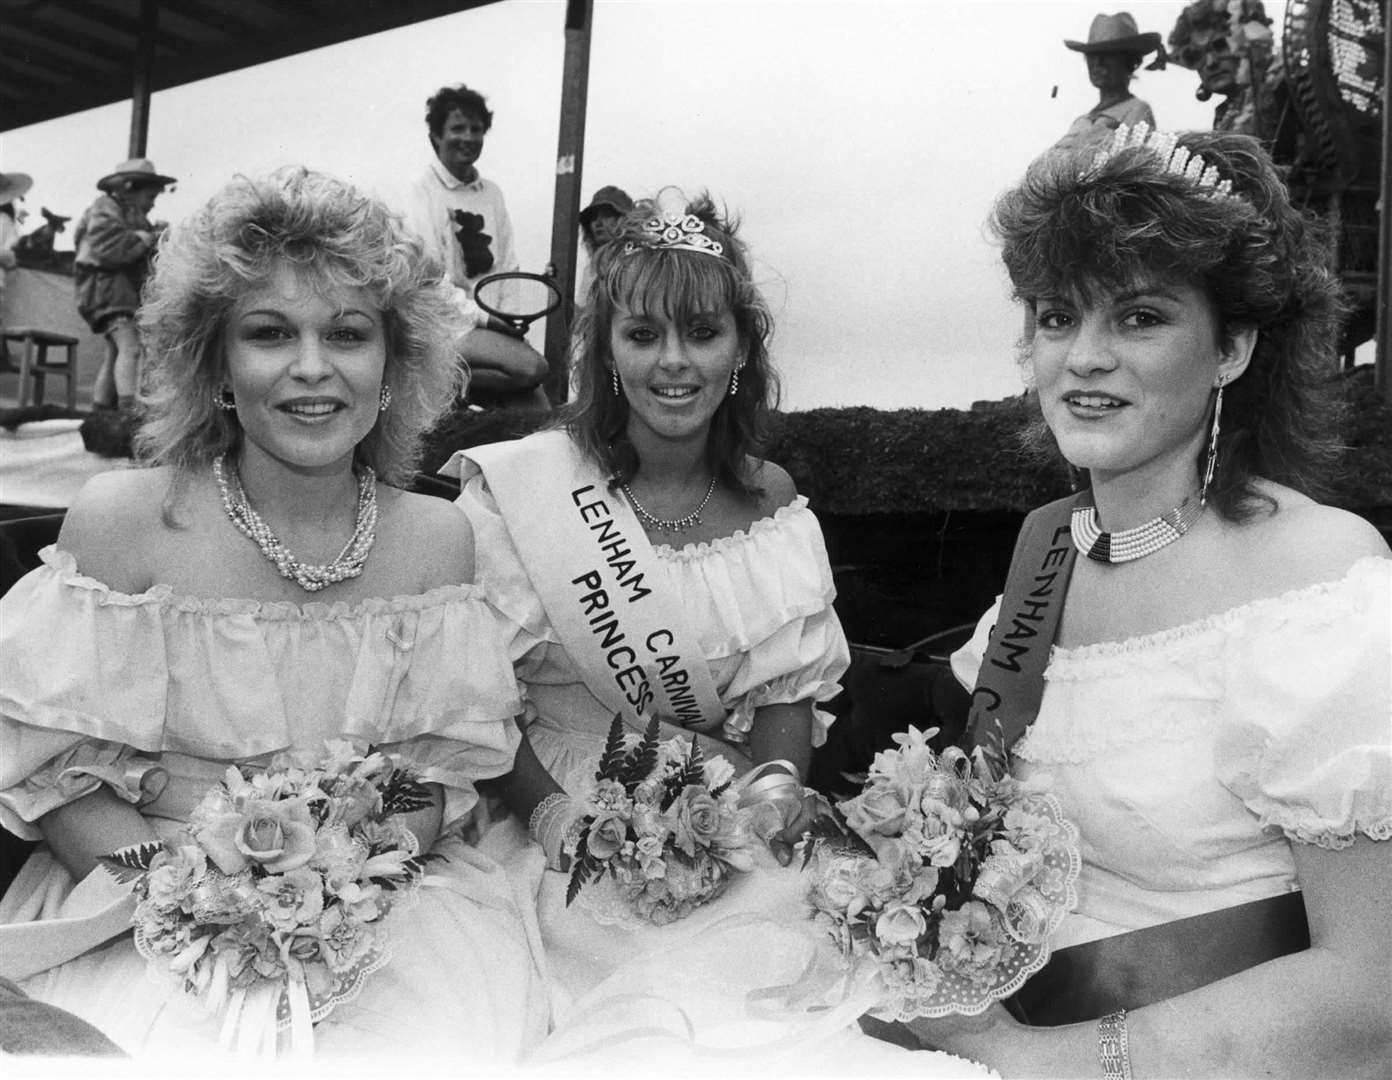 Lenham Carnival Queen Kelly Pearse (right), her princesses Sarah Butler (left) and Jacky Smith in June 1988